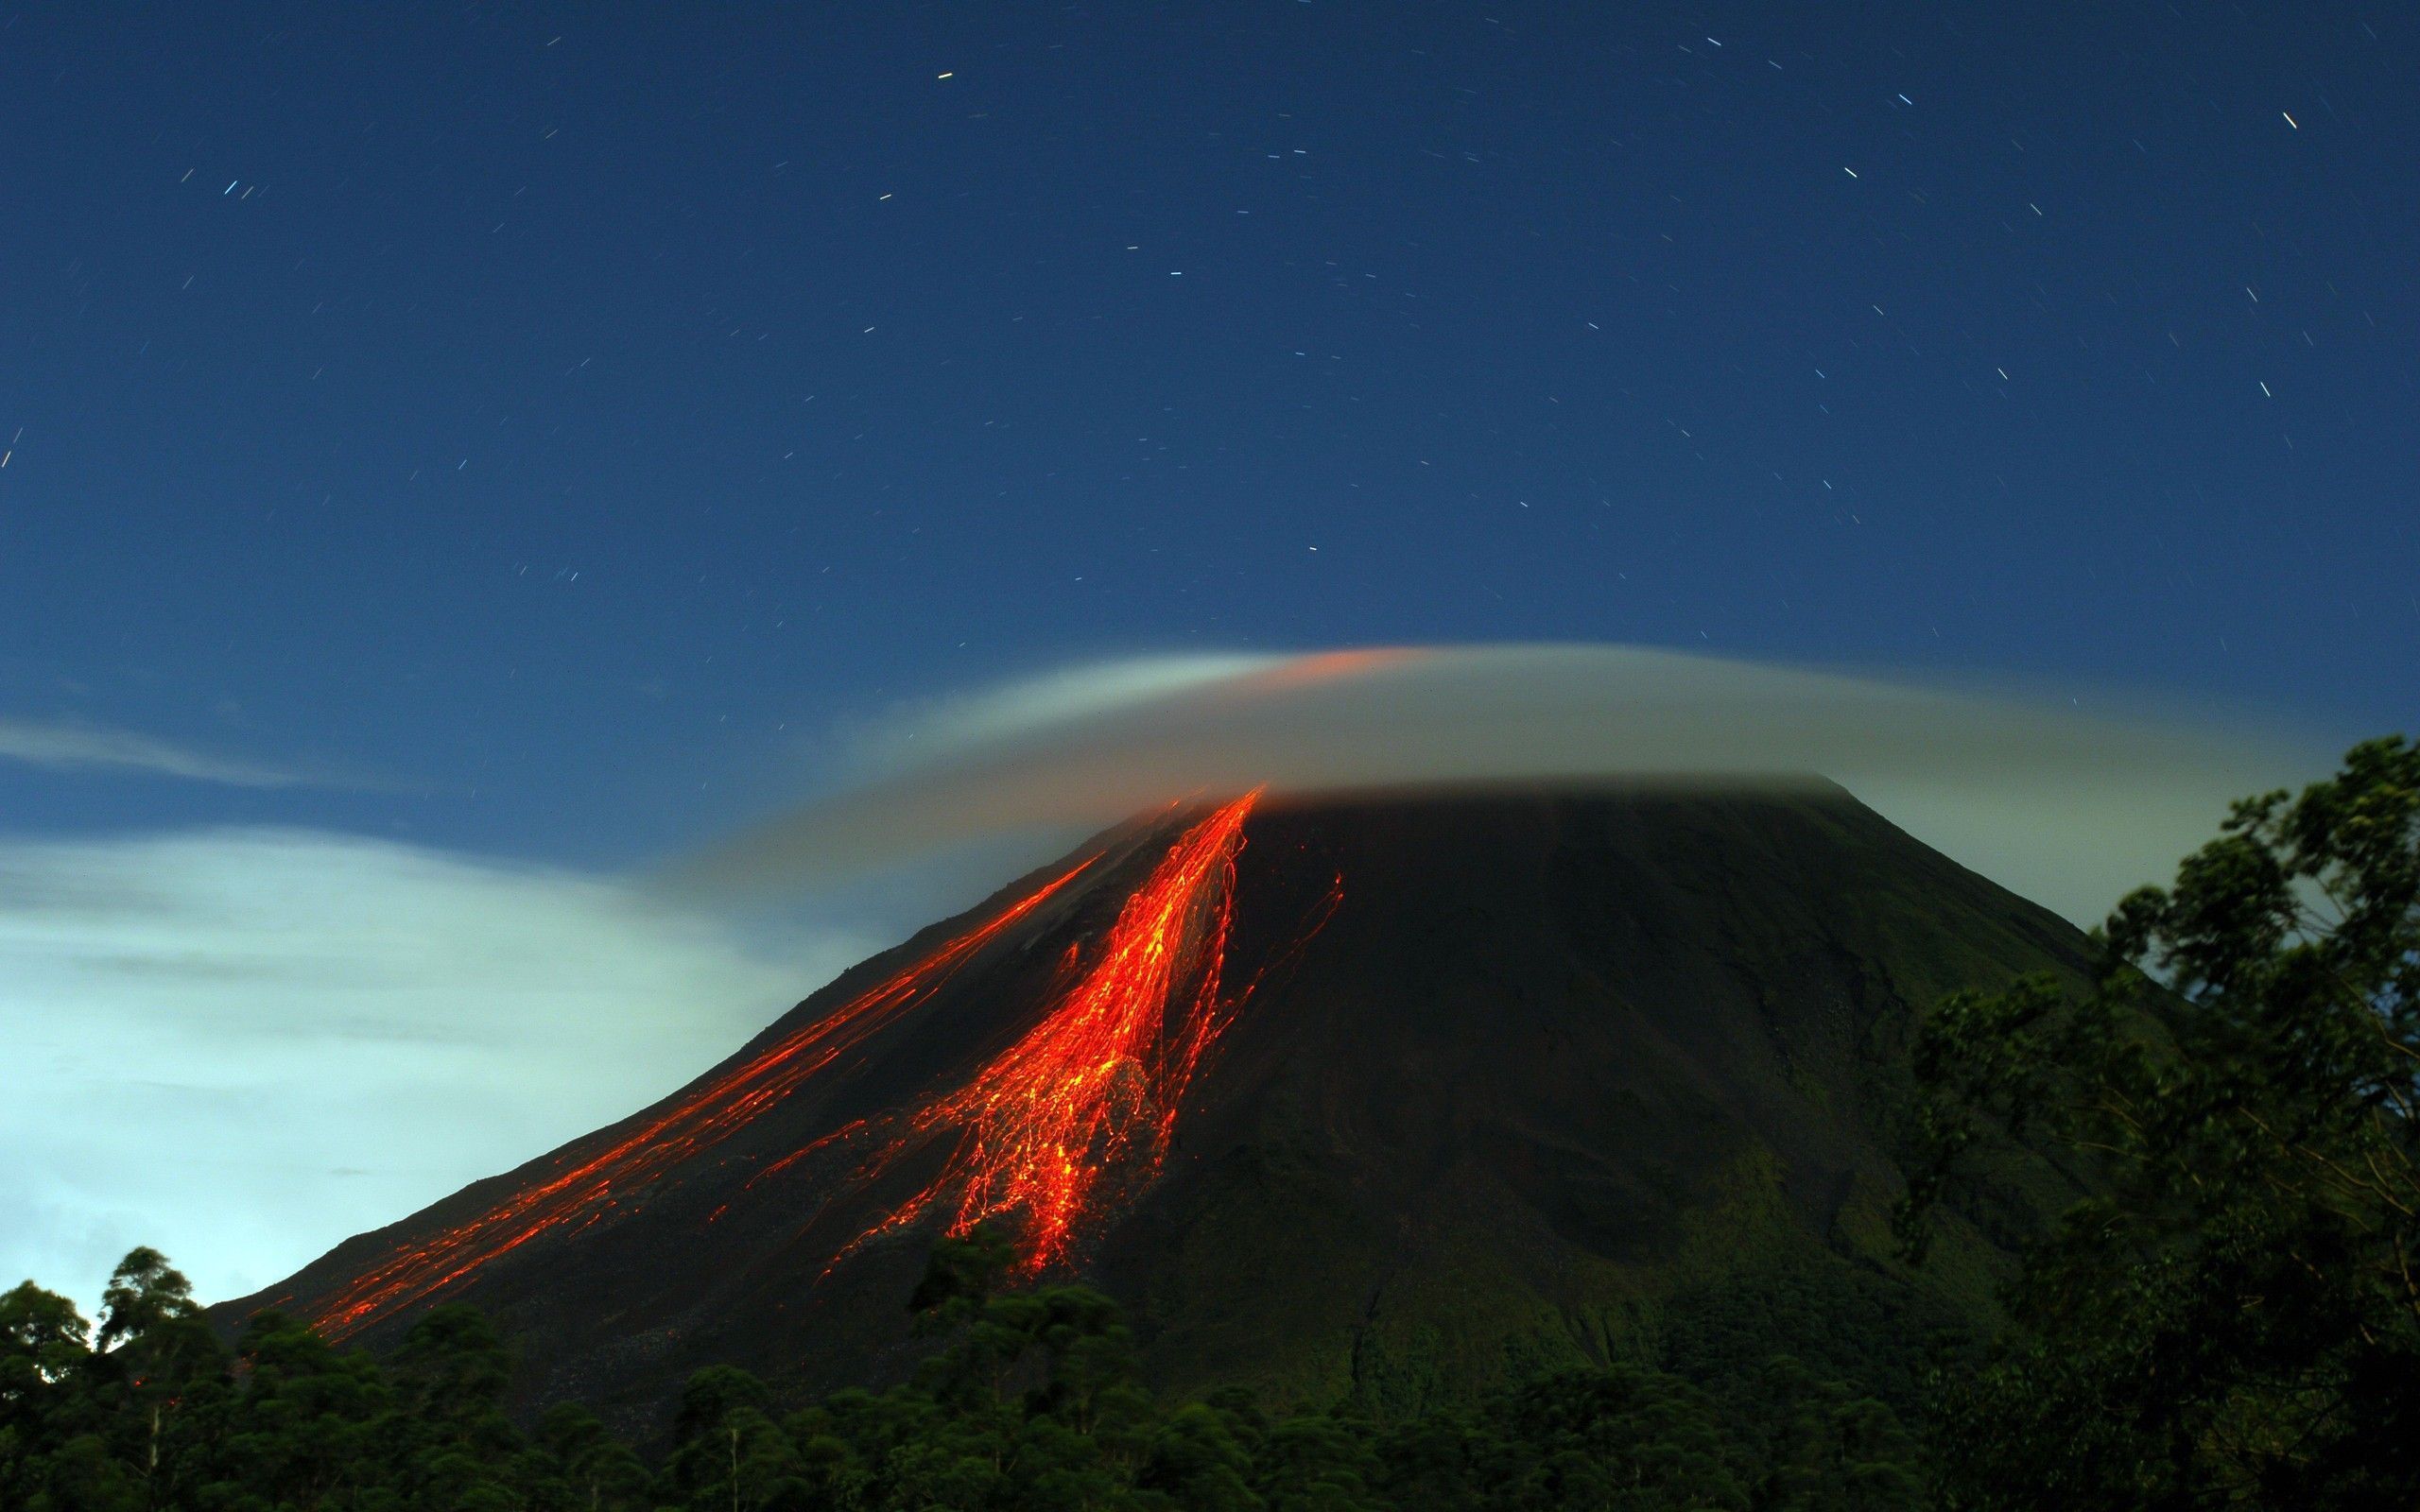 Eruption of an old volcano wallpapers and images - wallpapers ...